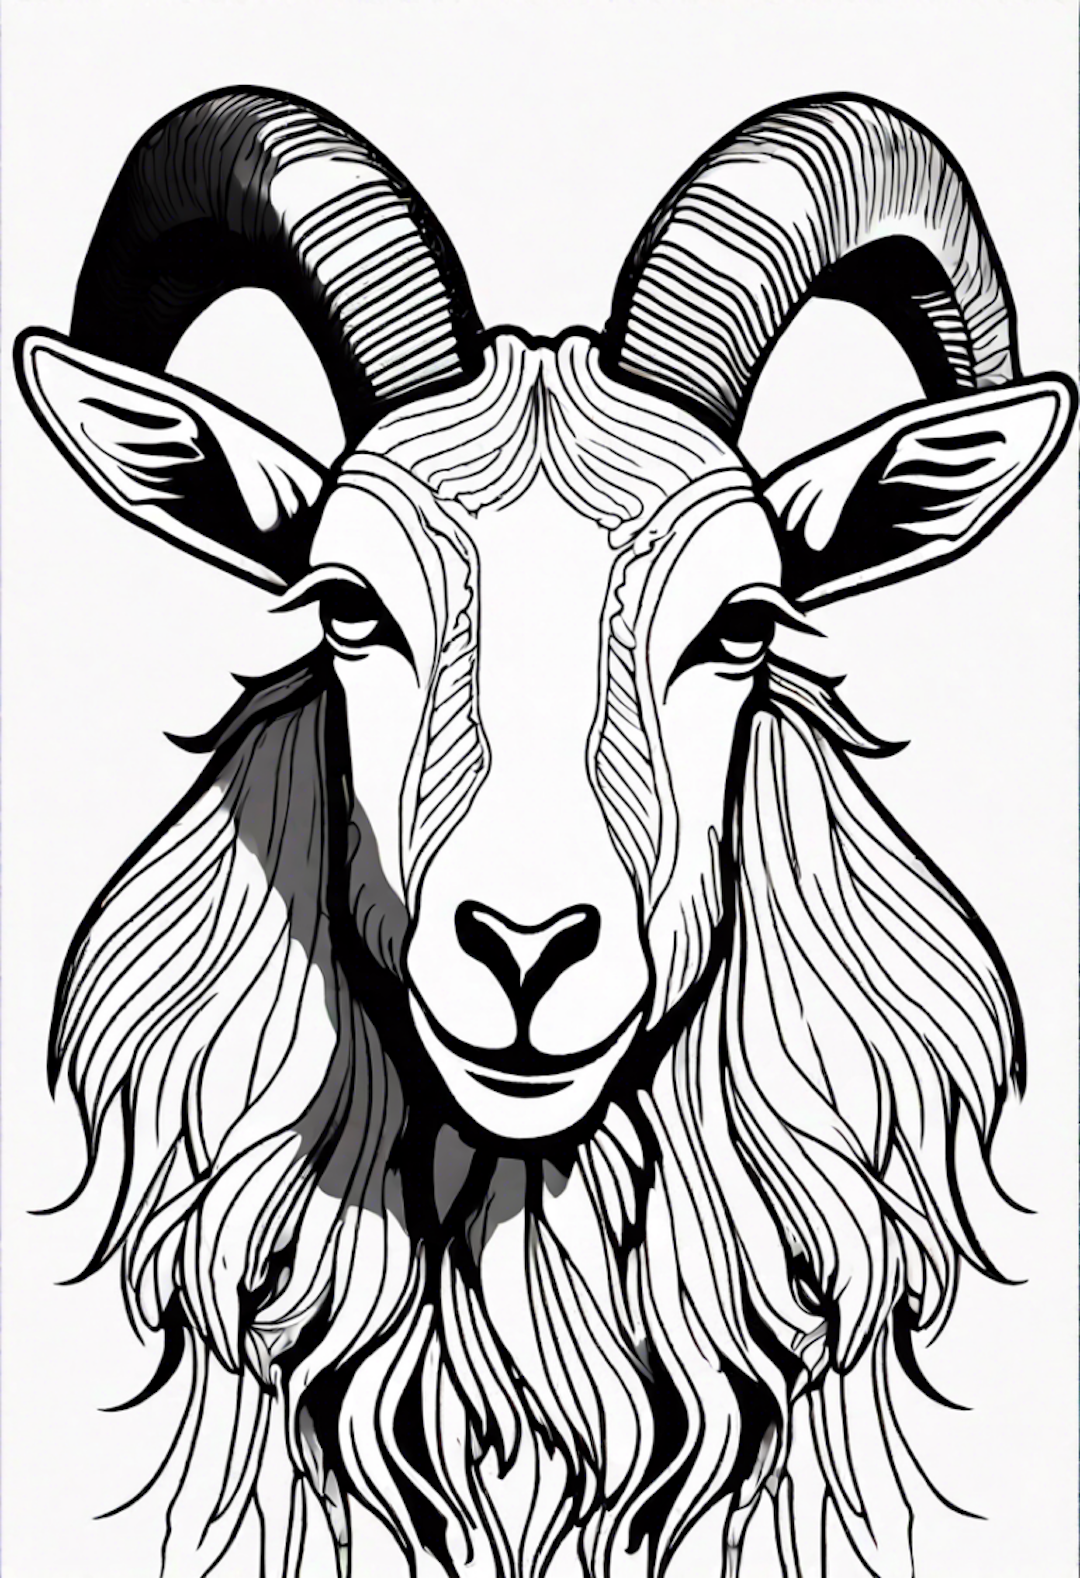 Majestic Ram Coloring Page coloring pages